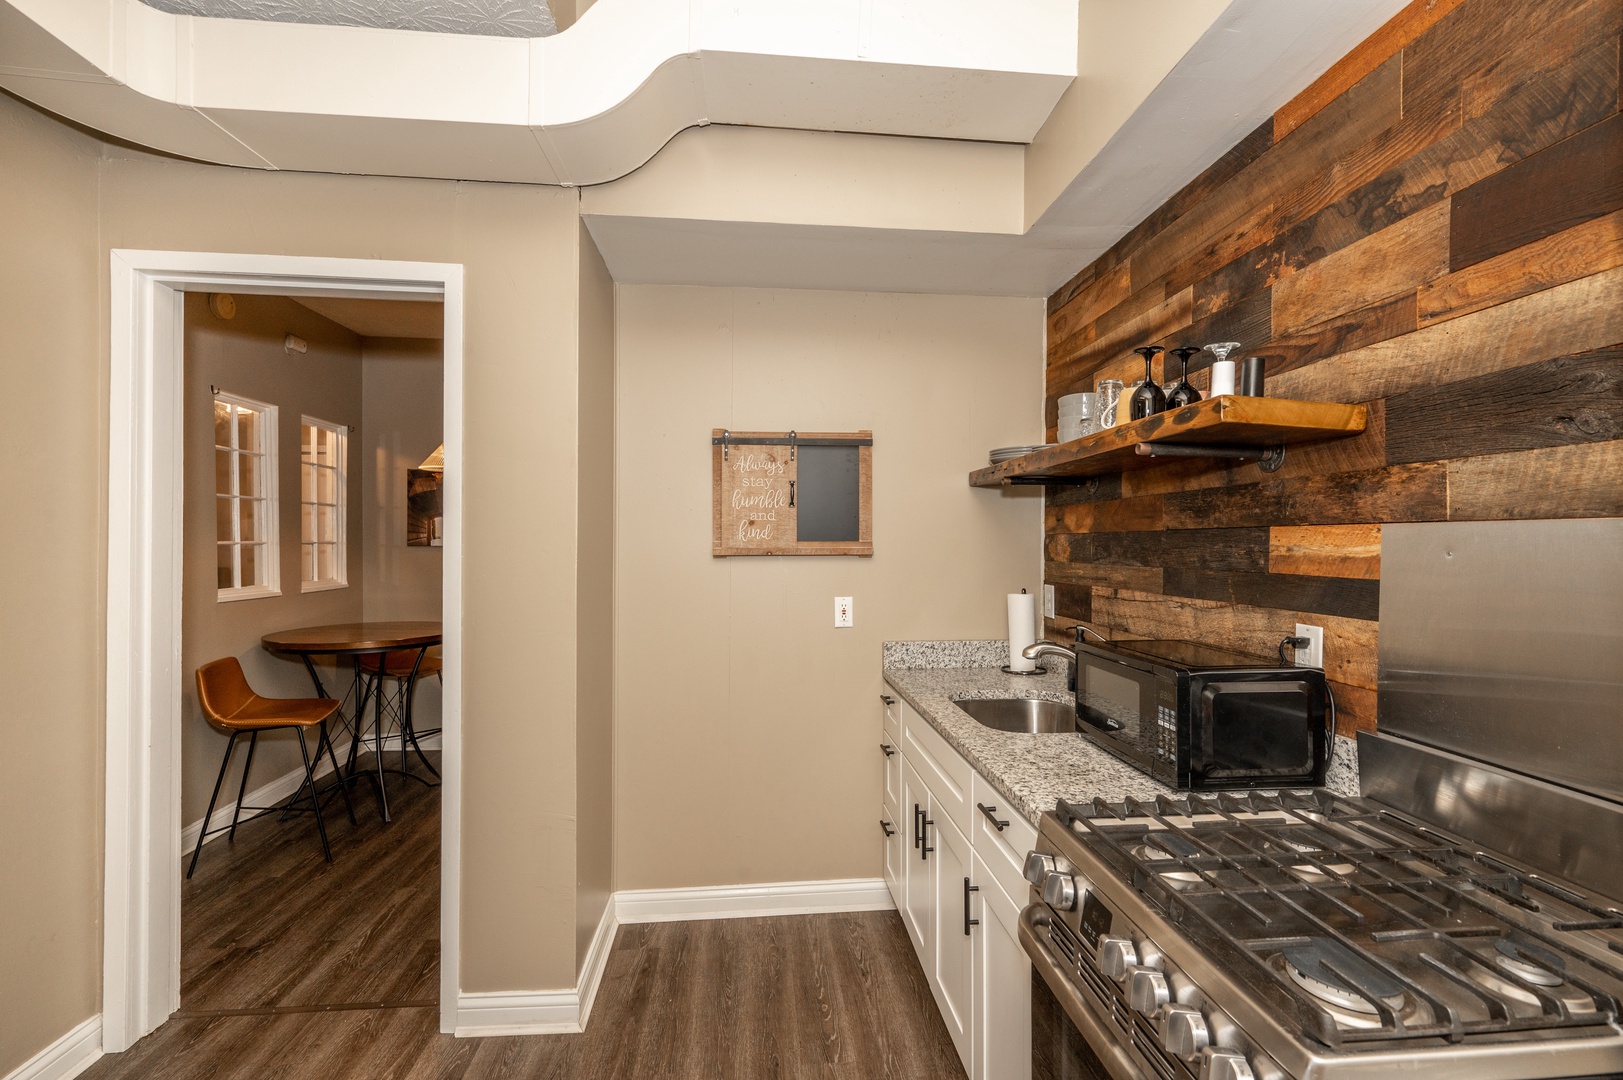 The kitchen is well-equipped for your visit & leads into a cozy dining area